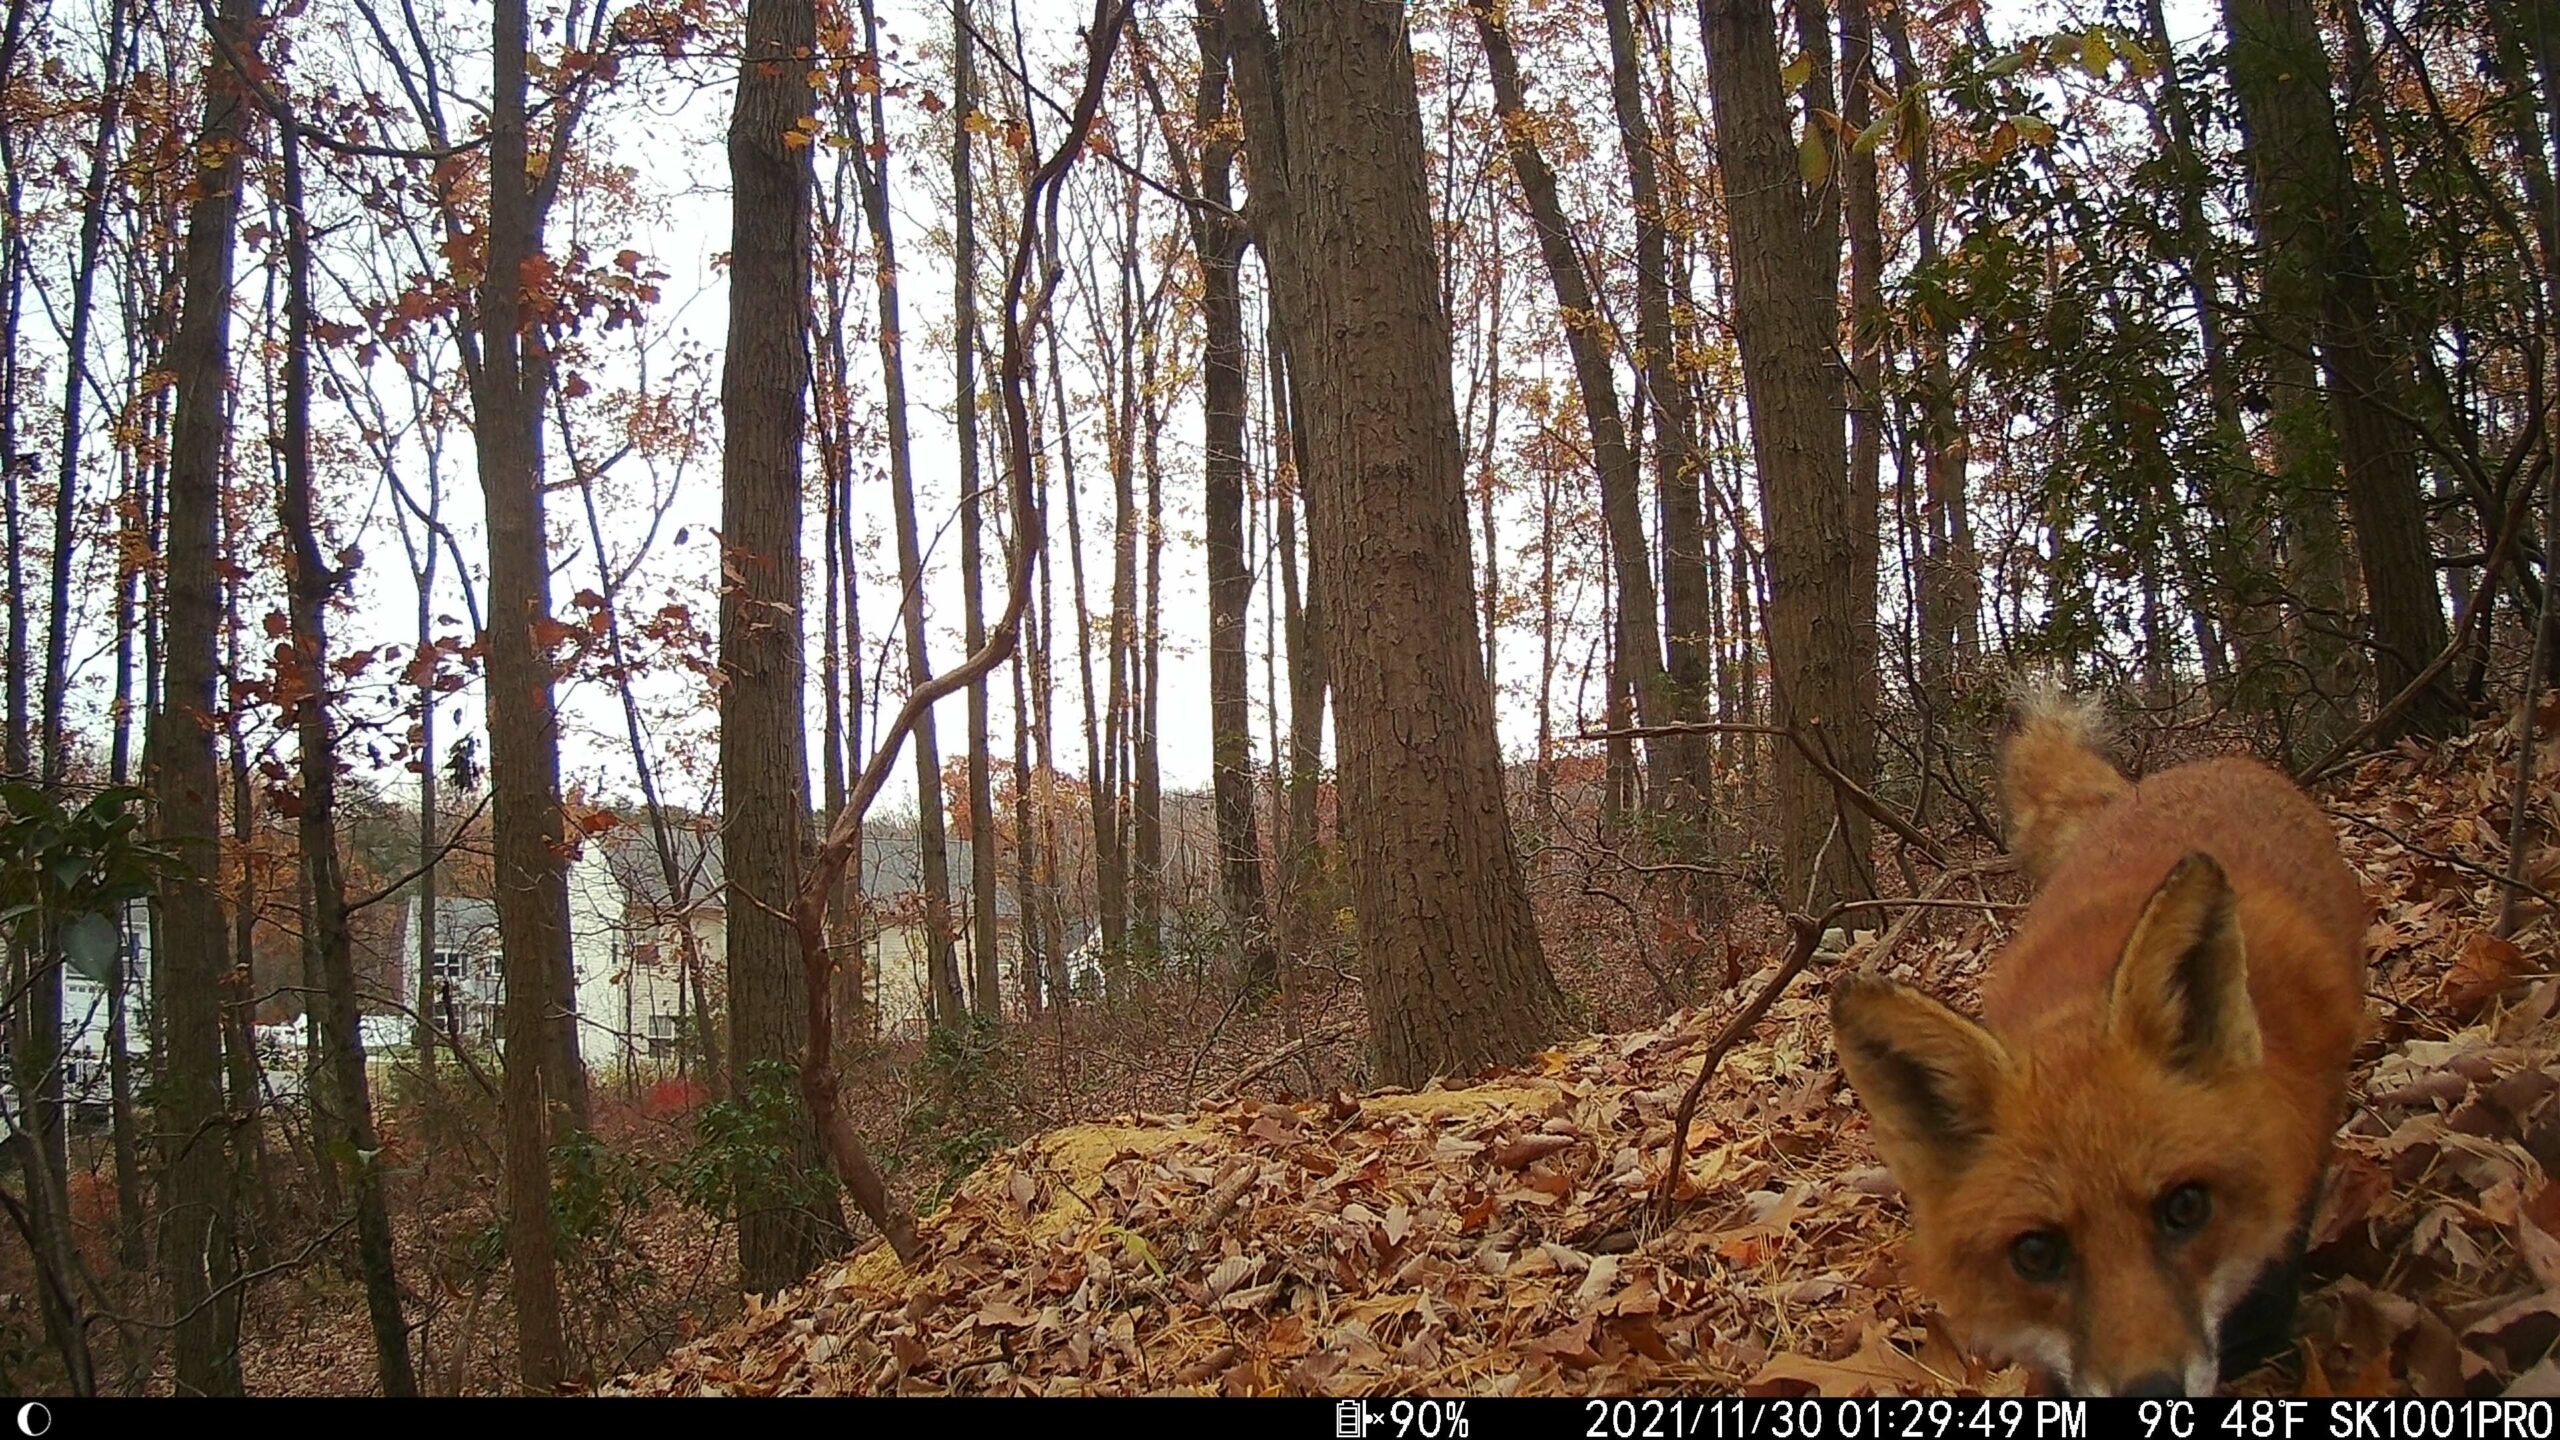 Photo from a trail camera of a red fox in a track of woods. The trees are half-bare, some still sporting red and gold leaves. The fox is low to the ground, stretching with its nose in the right bottom corner of the photo, eyes fixed directly on the camera. The date of the photo is November 30, 2021.